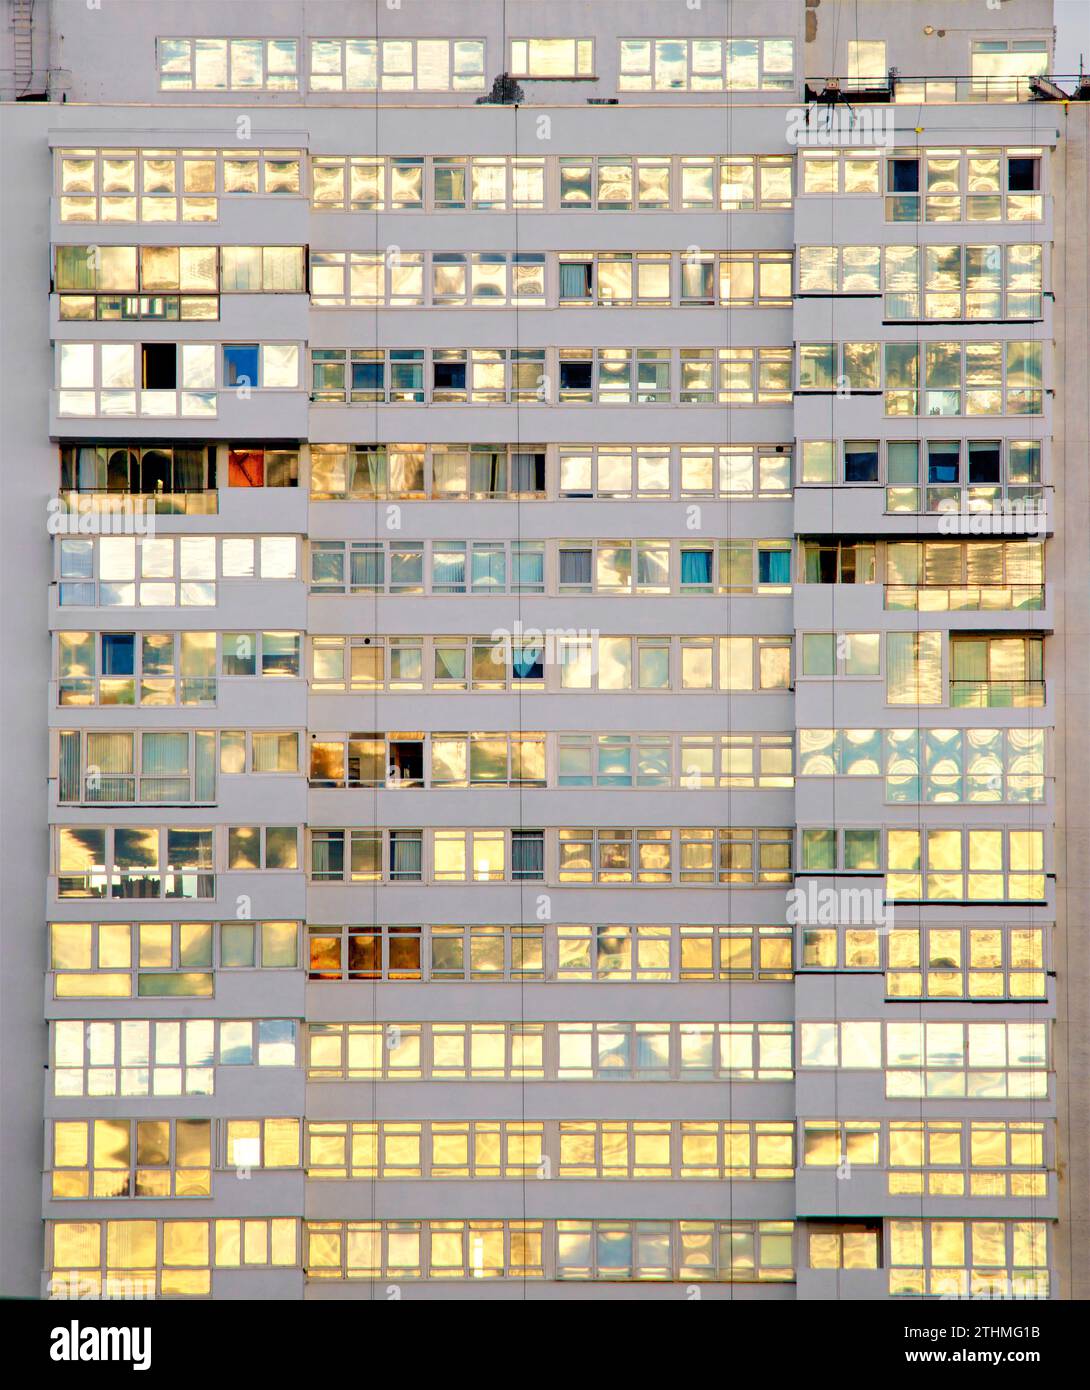 Windows in an apartment building. Sussex Heights, a residential tower block in the centre of Brighton, part of the English city of Brighton and Hove. Built between 1966 and 1968 it rises to 334 feet. Stock Photo